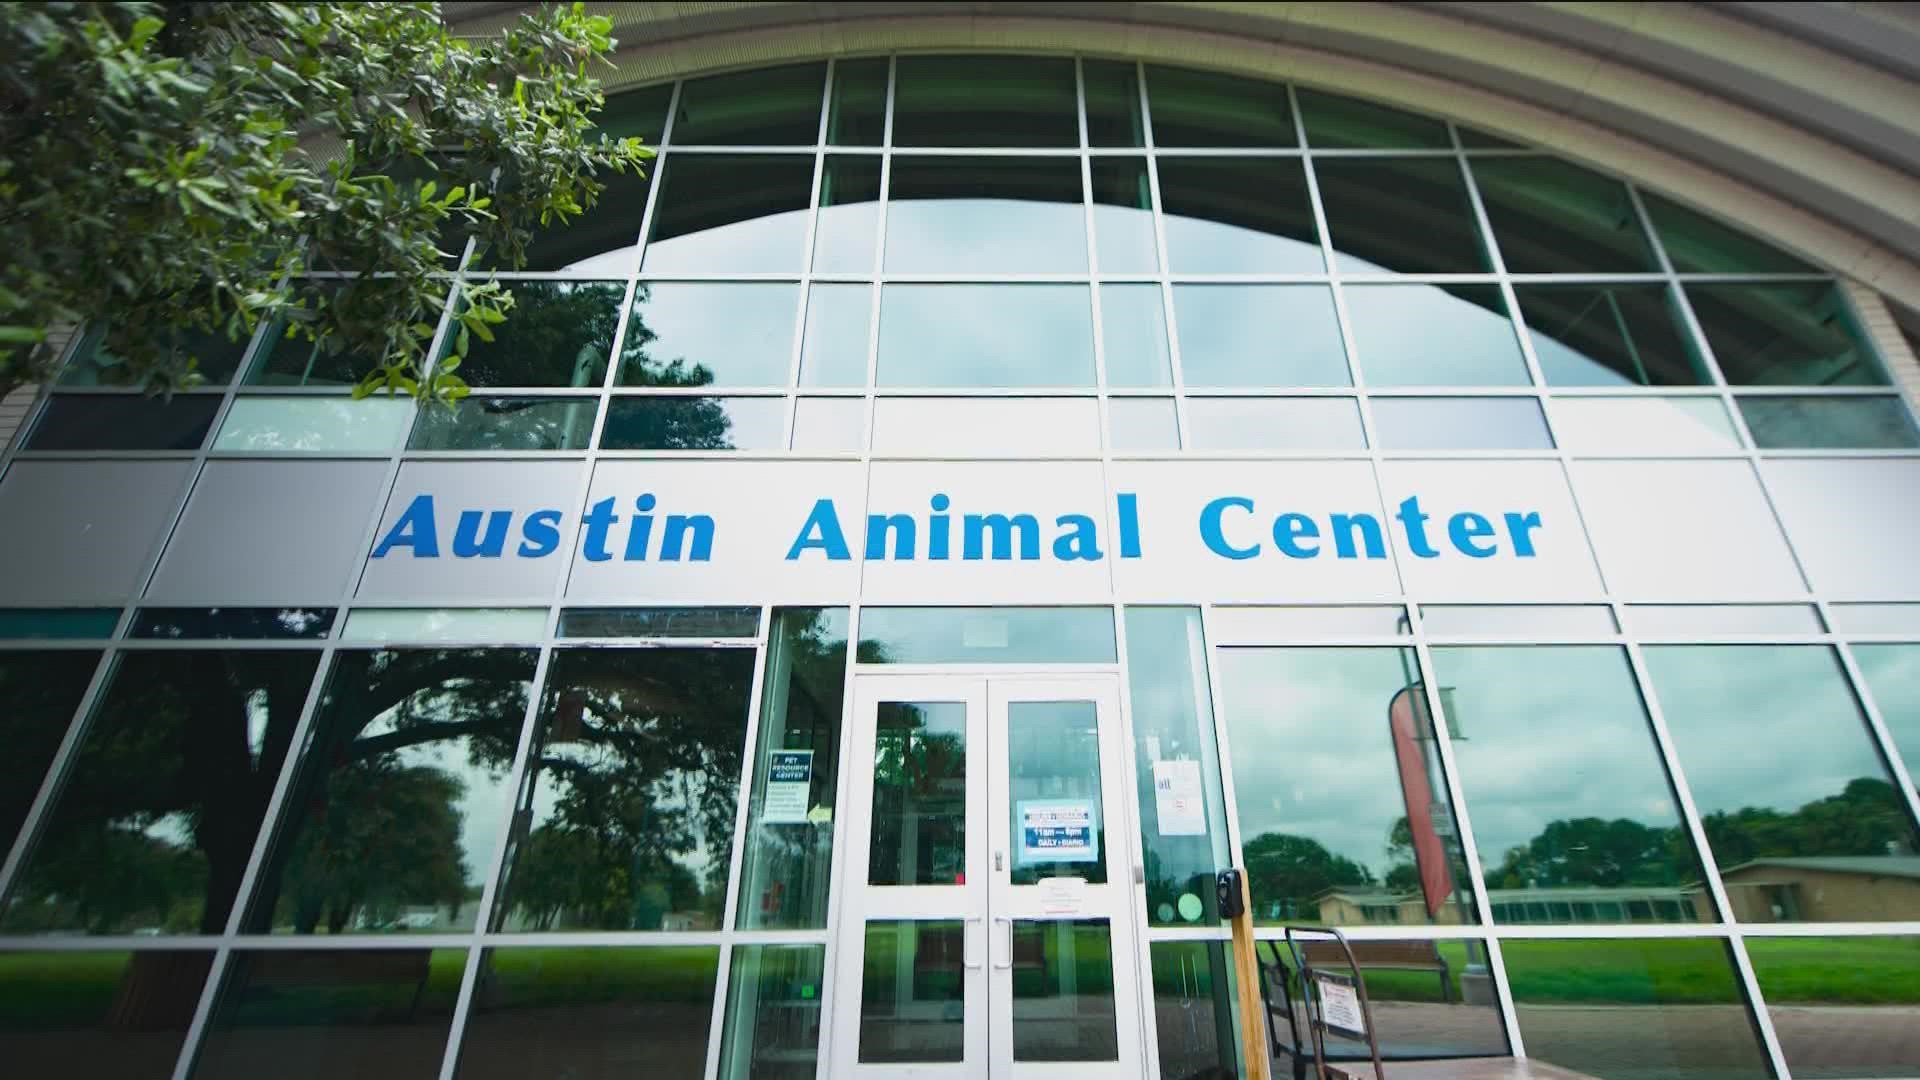 The Austin City Council recently approved an audit for the Austin Animal Center due to the overflow of pets combined with critical understaffing.